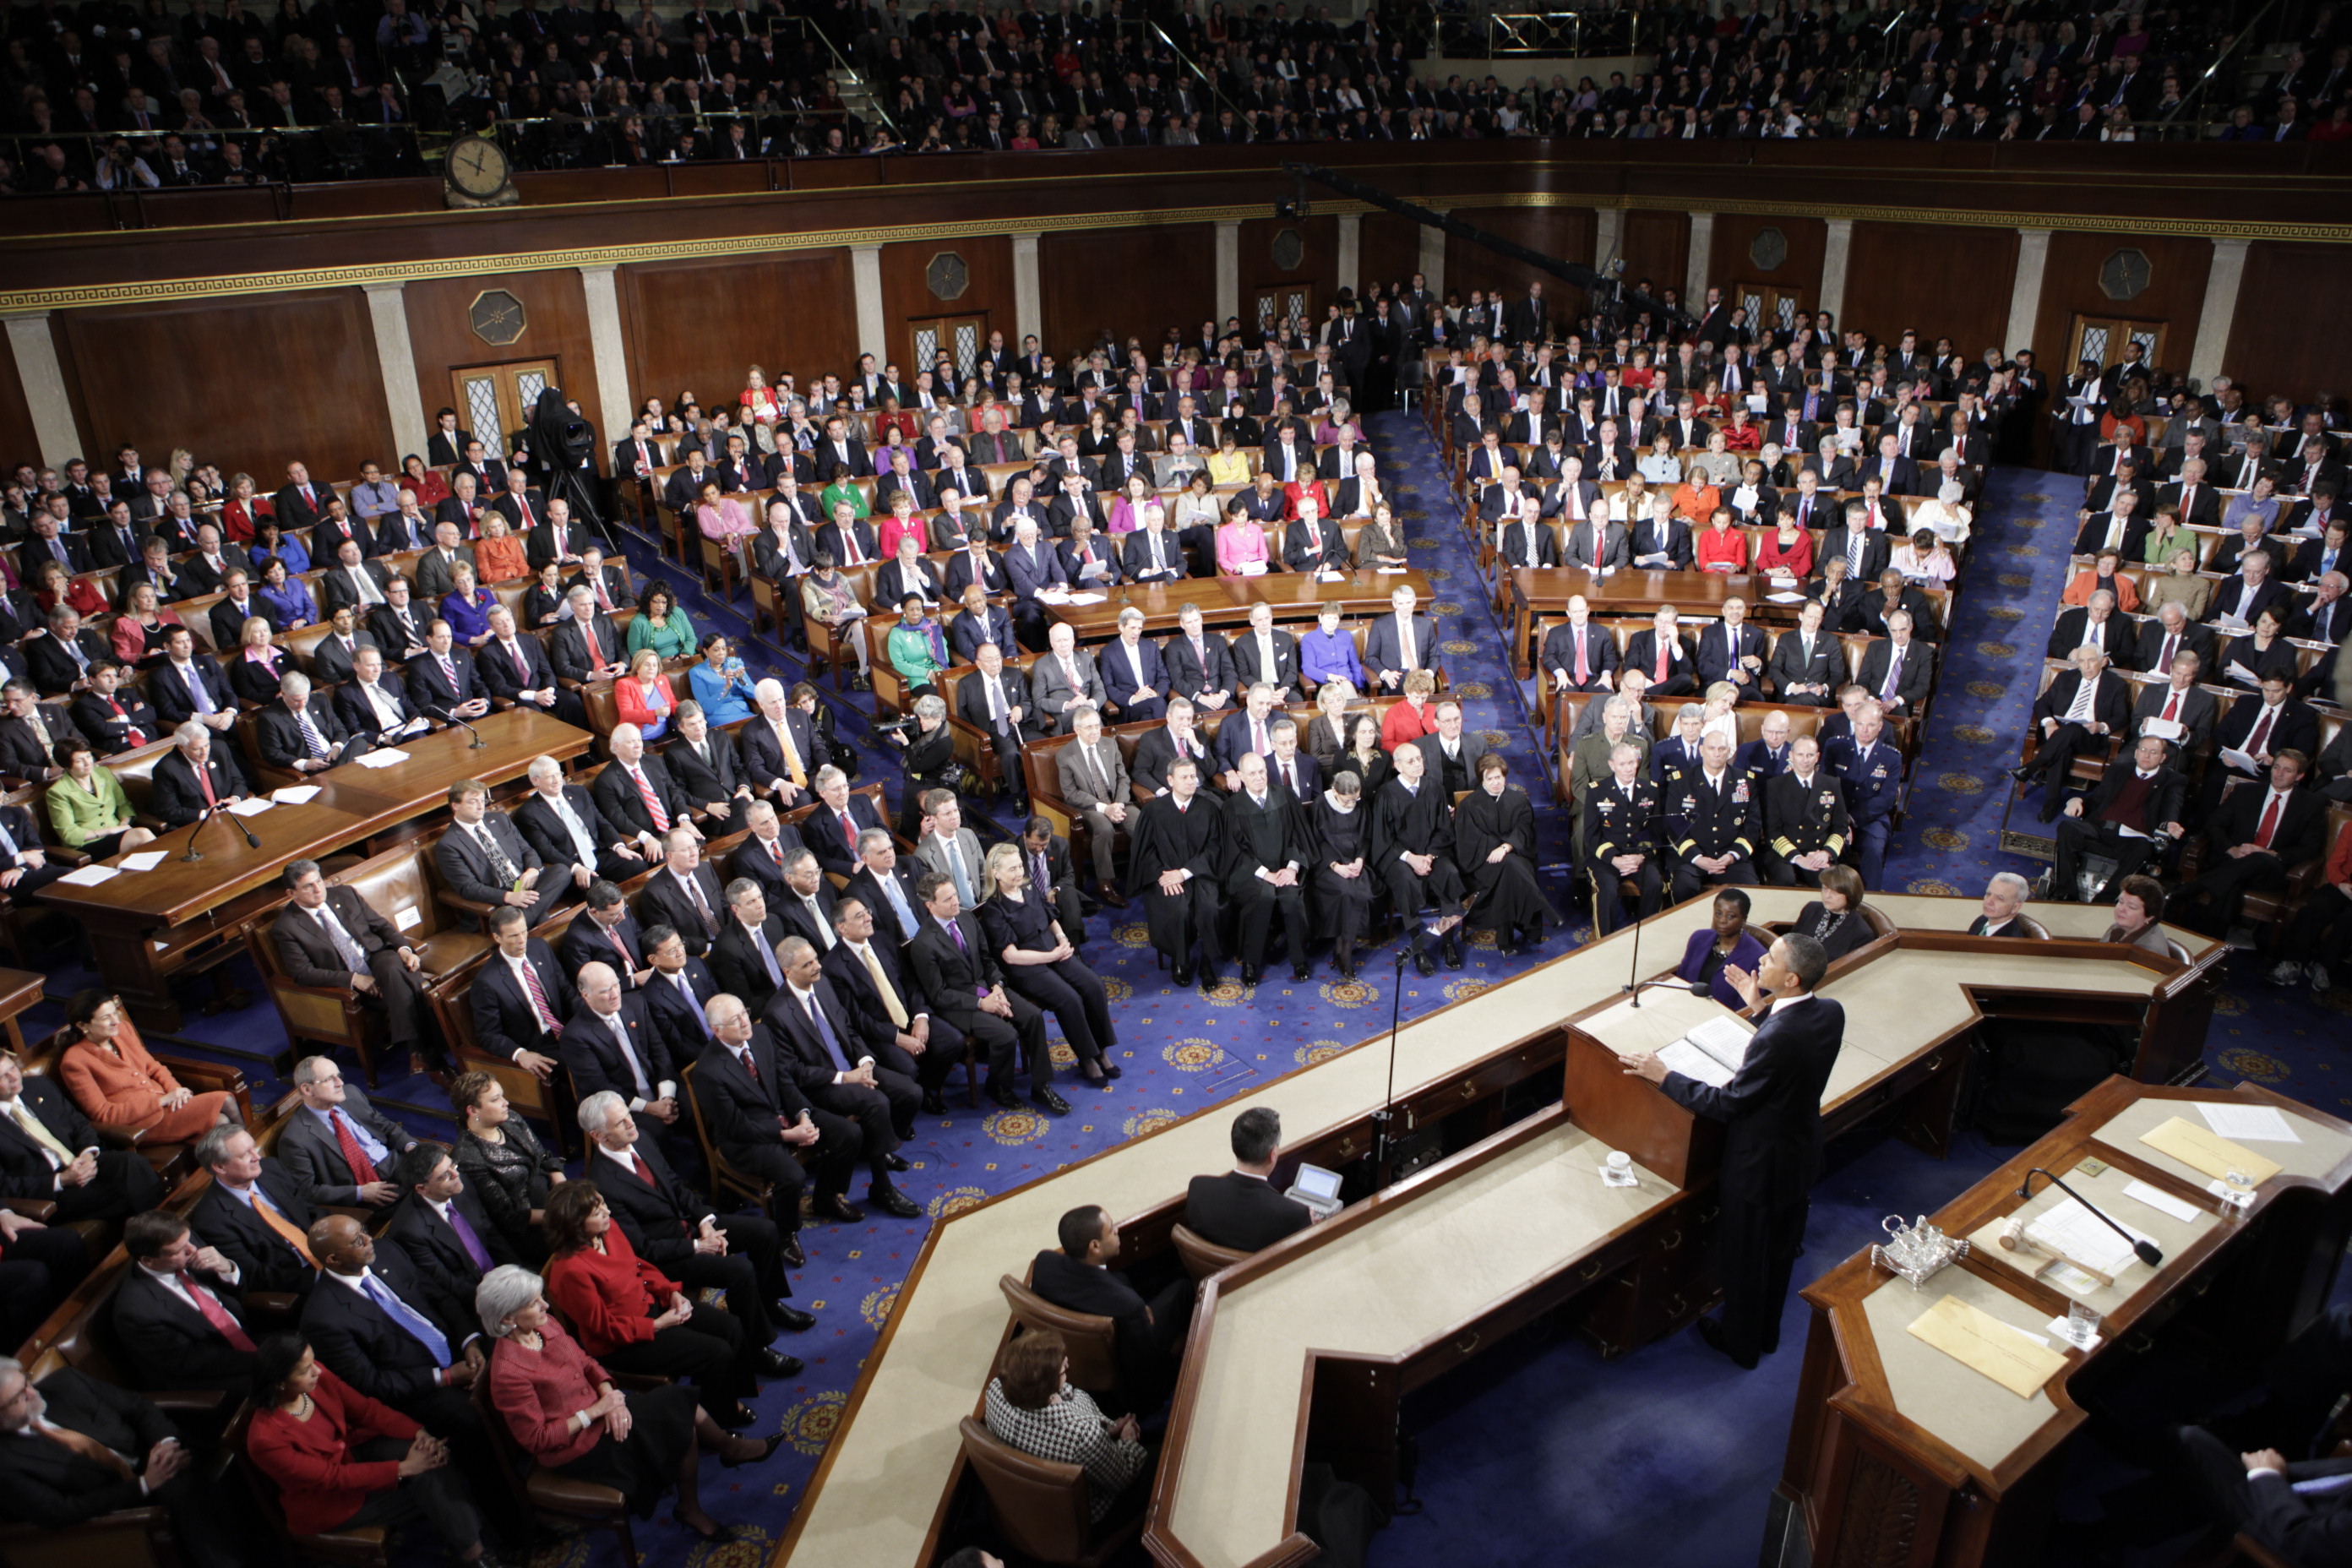 President Obama delivers the 2012 State of the Union 